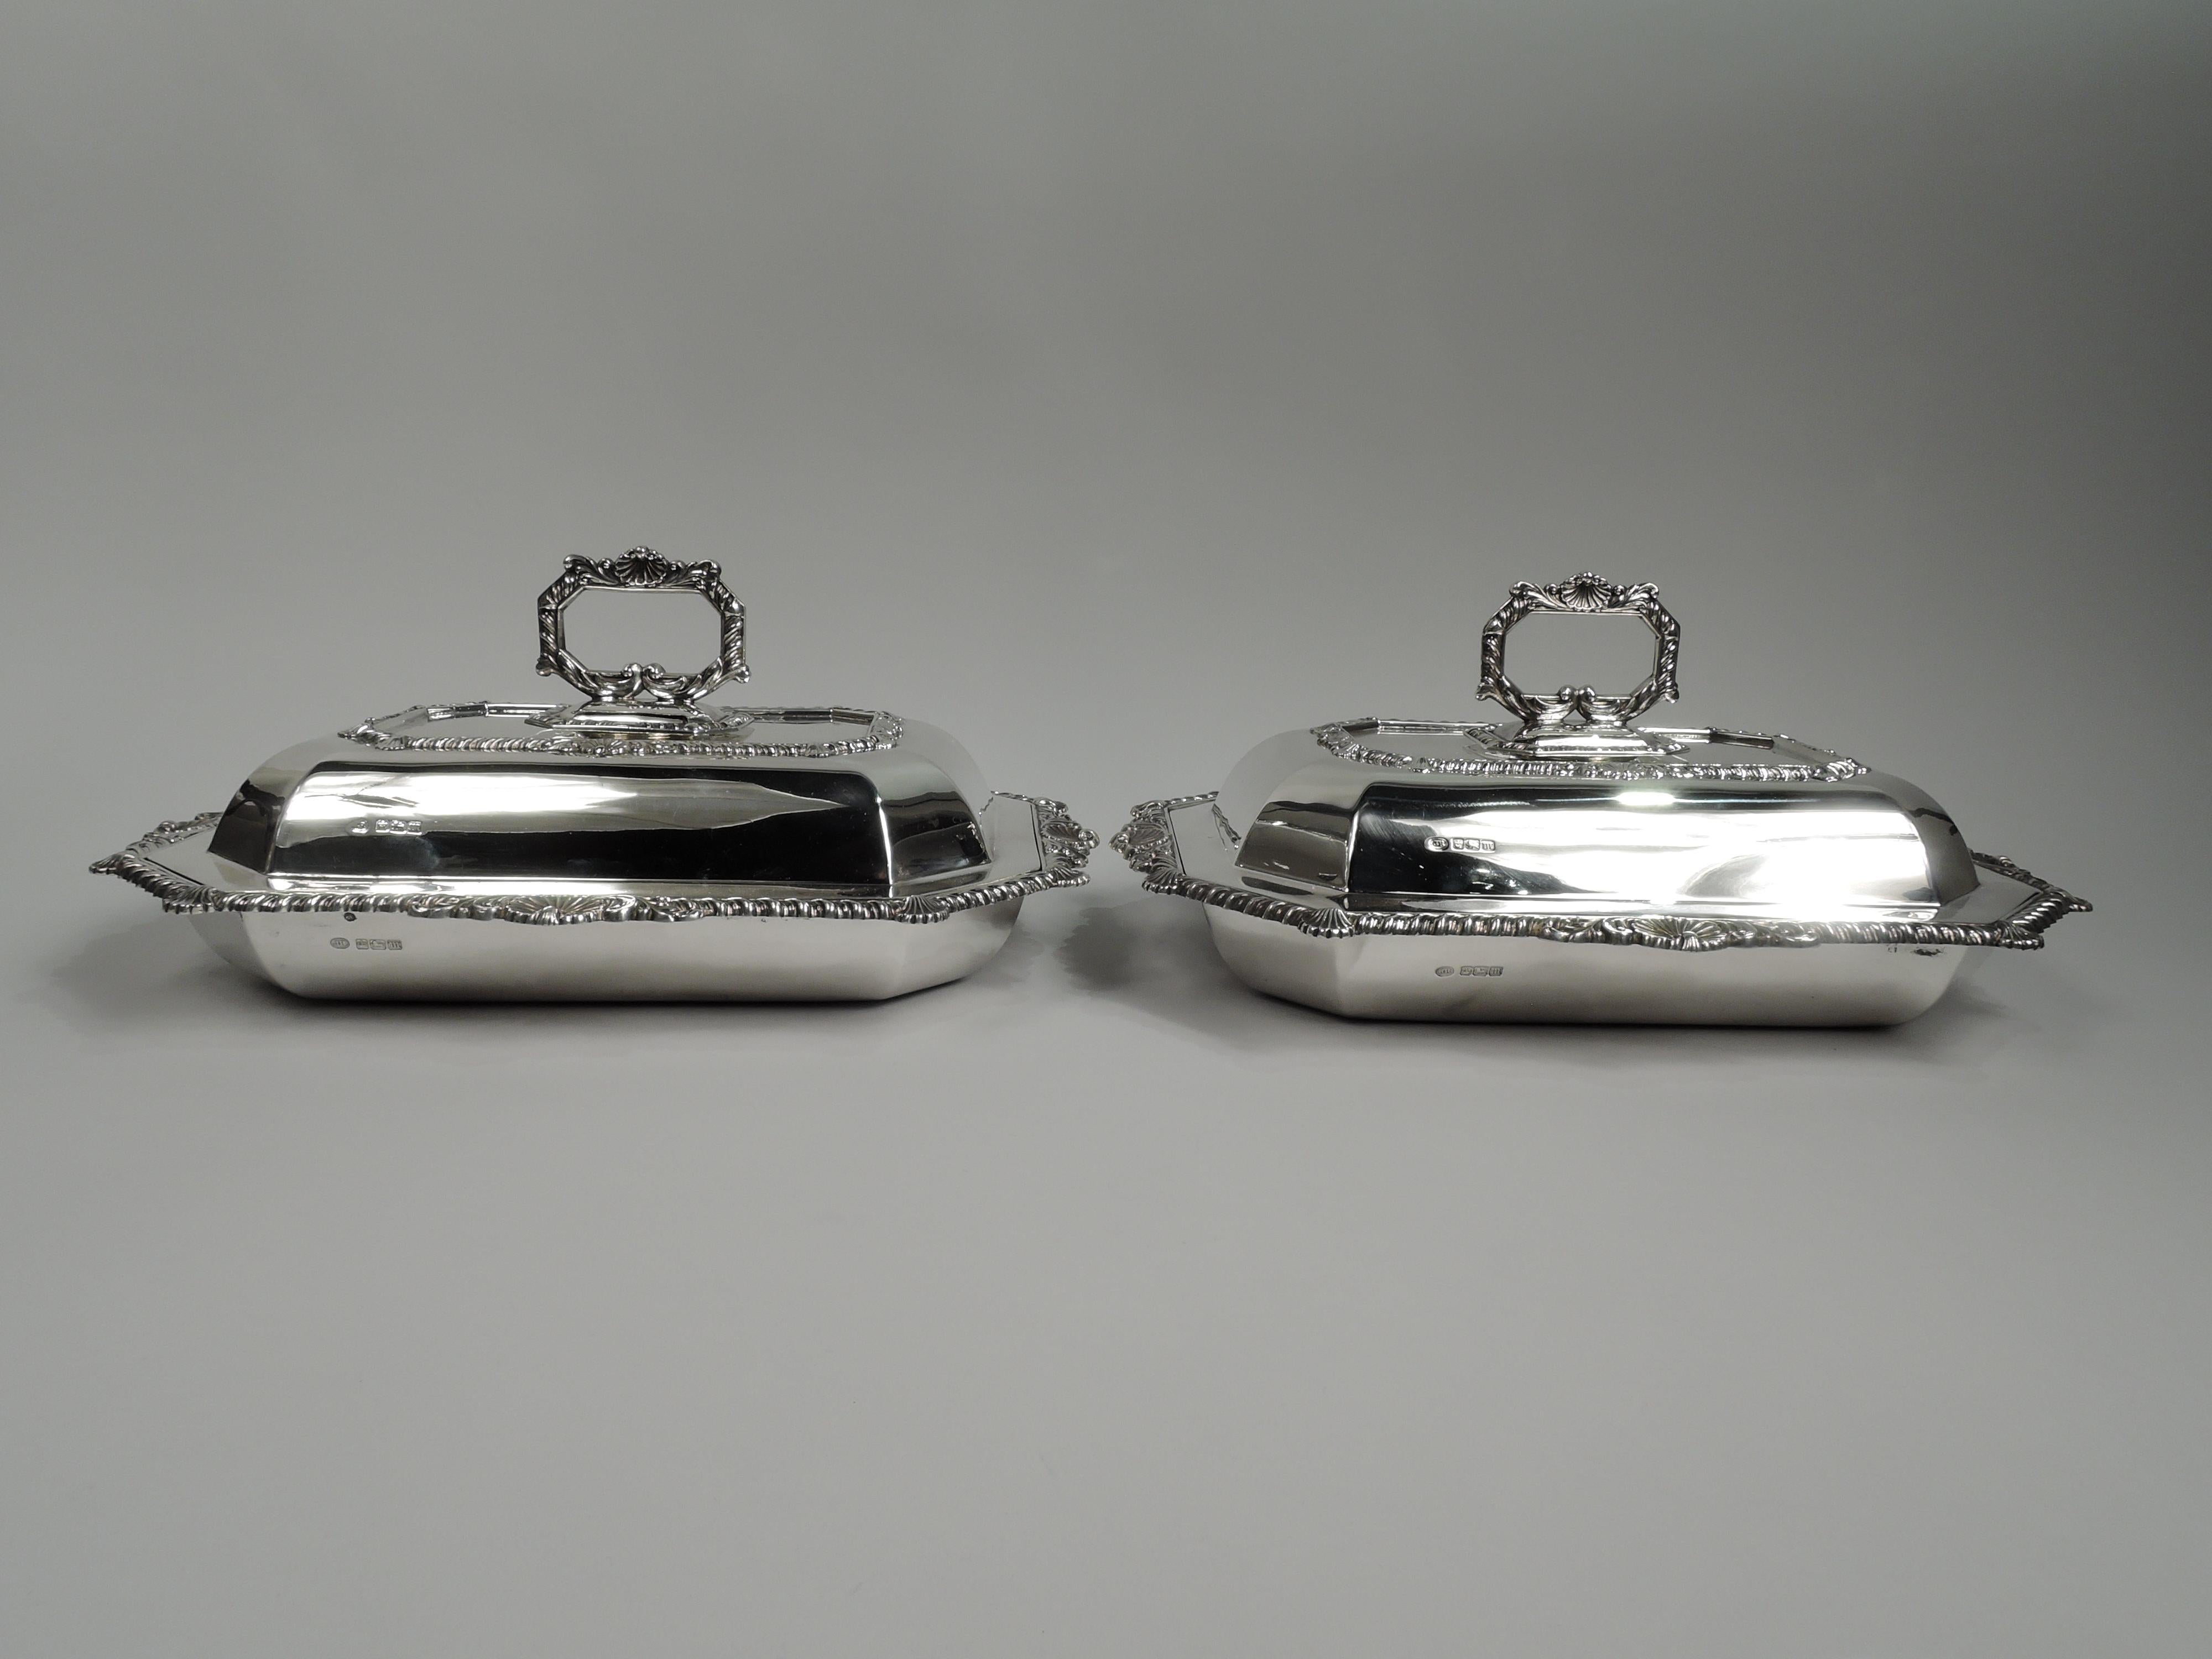 Pair of Edwardian Georgian sterling silver covered serving dishes. Made by John Round & Son Ltd in Sheffield in 1904. Each: Rectangular with chamfered corners and tapering sides. Cover raised and chamfered with twist-lock ring handle. Handle,